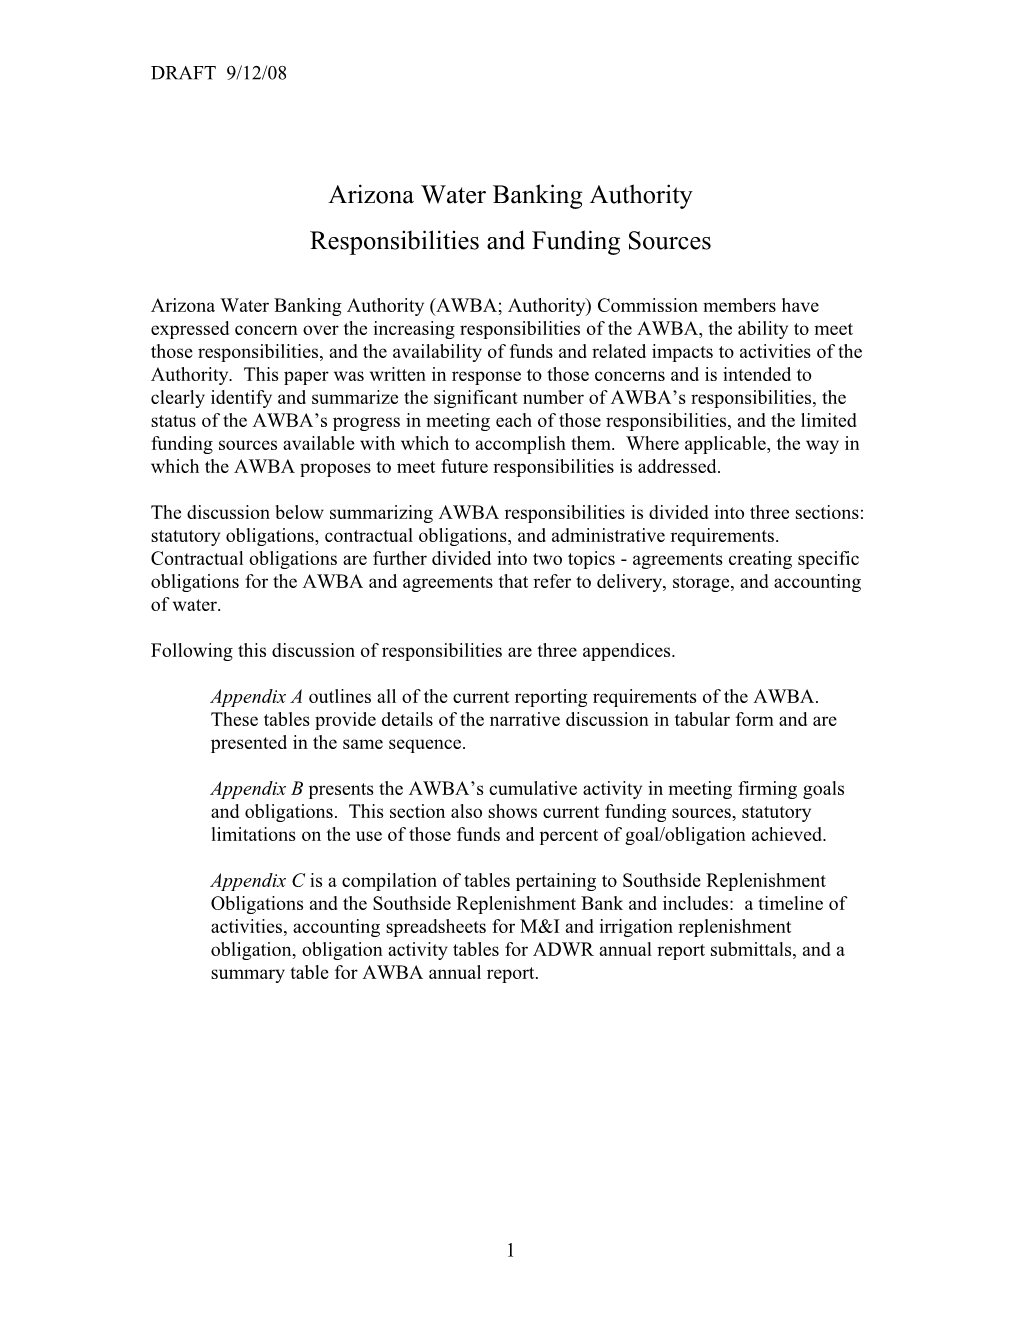 Discussion Paper Identifying Arizona Water Banking Authority